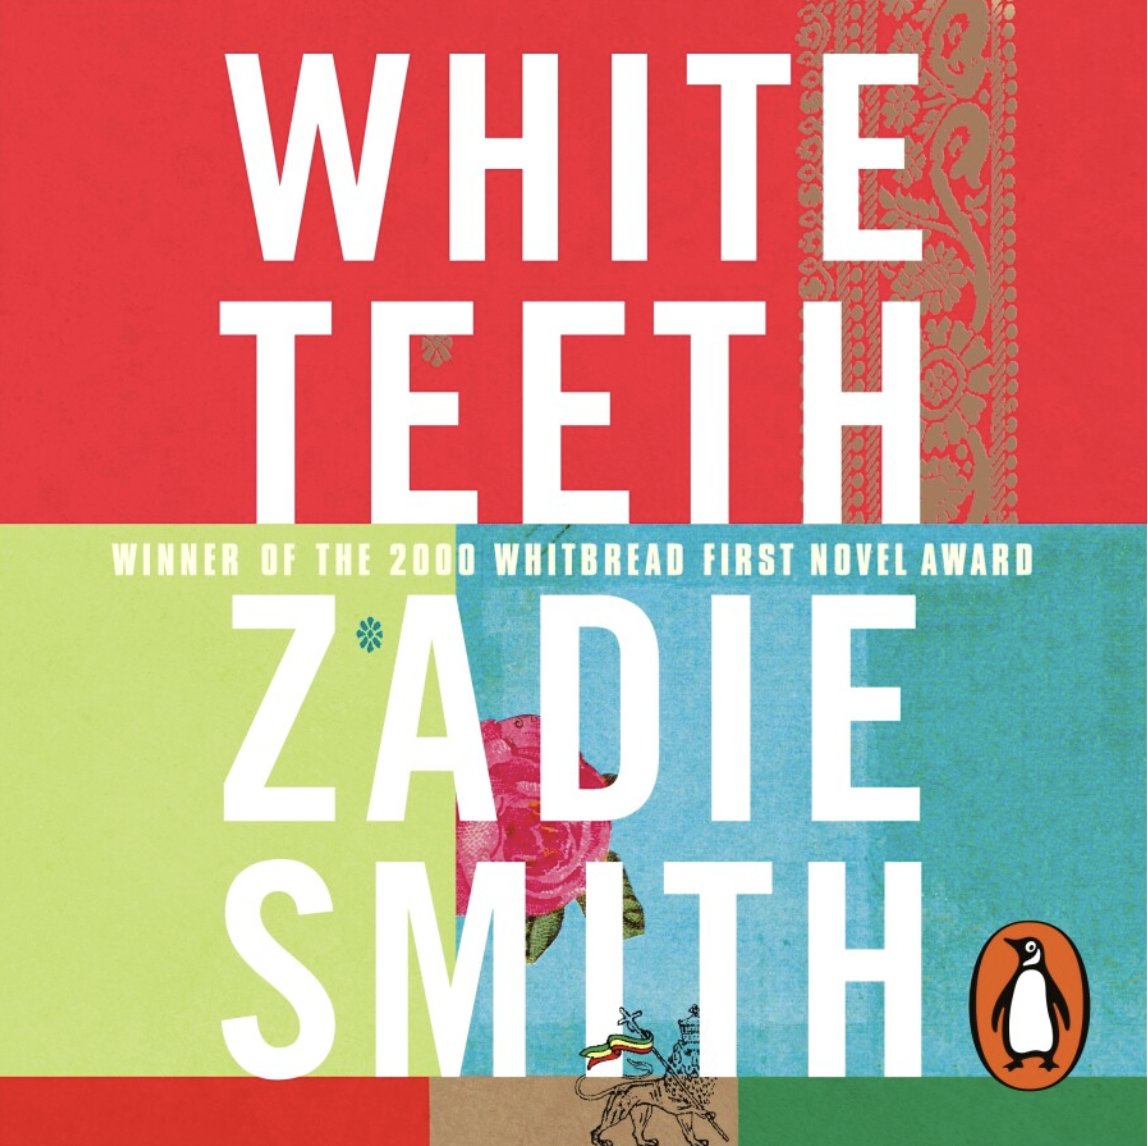 From our✨Stunning Debuts✨collection. Recommendation 6/8: White Teeth by Zadie Smith

Literary tour de force, Zadie Smith's White Teeth is an epic collage of big-city metropolitan Londonism. Its booming big heart and riotous prose cement it firmly as a modern classic of